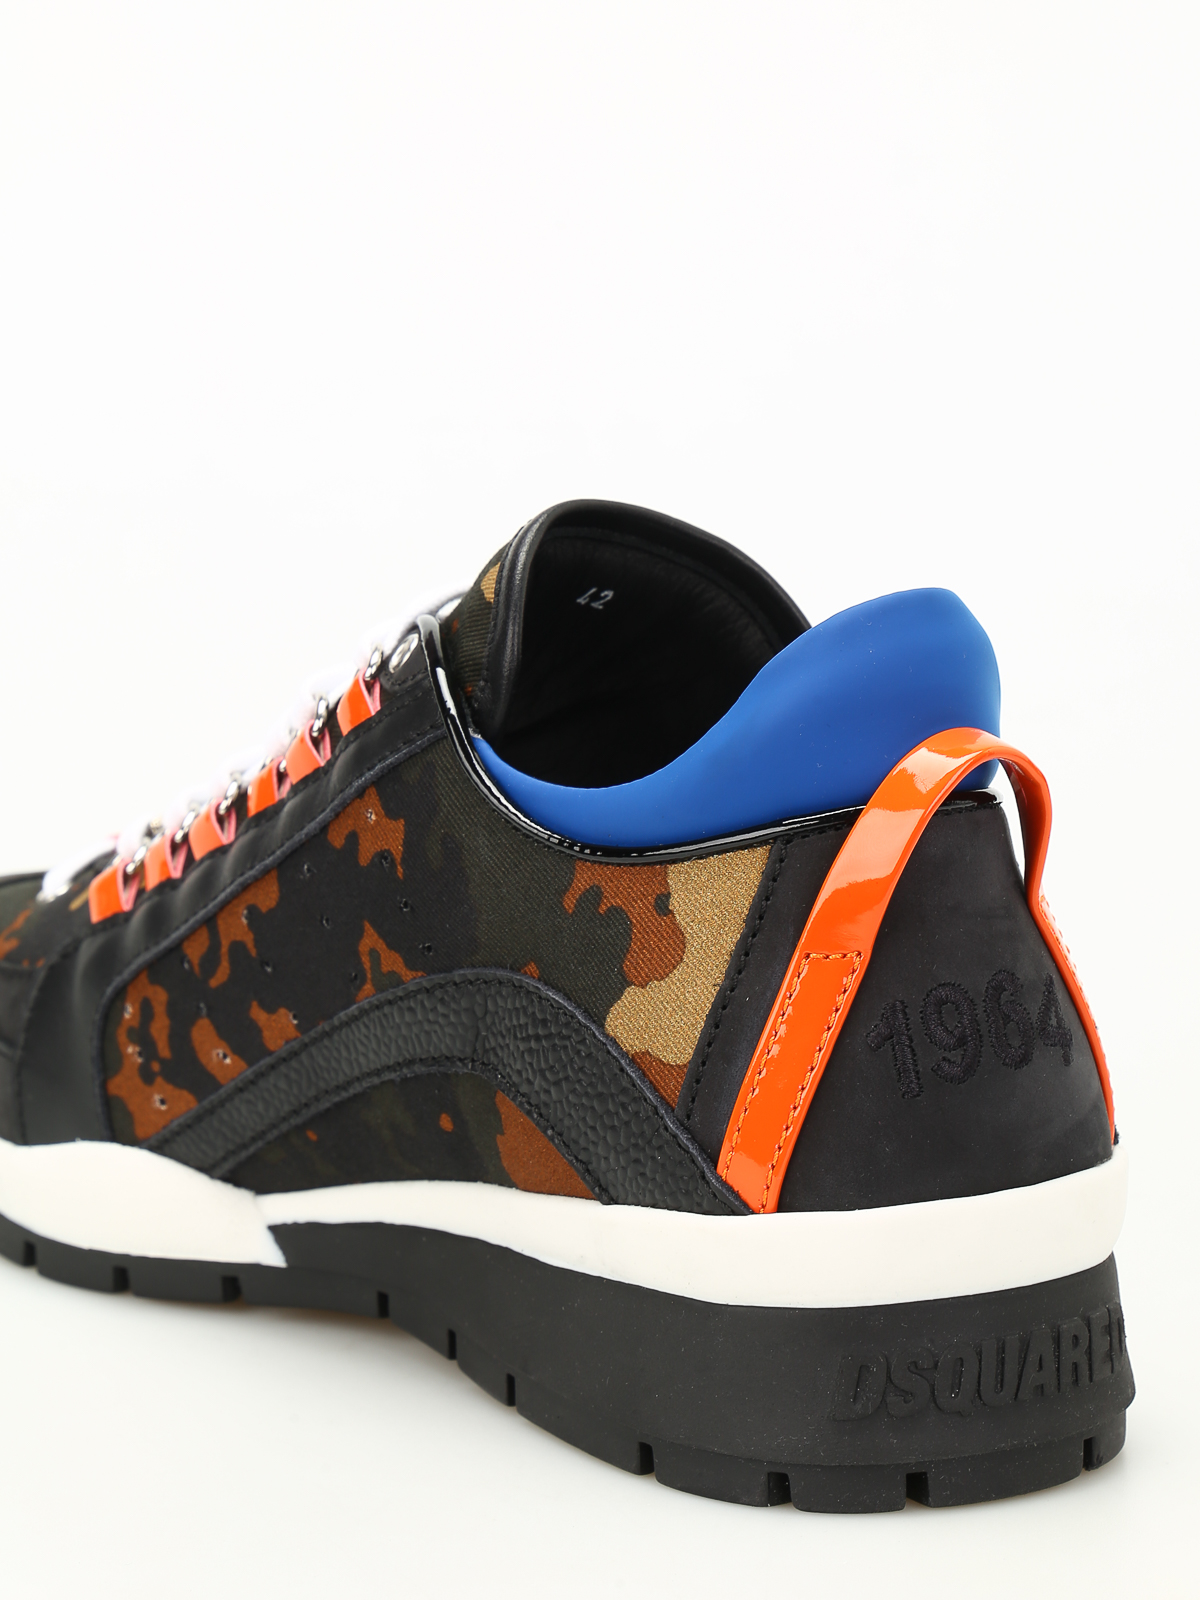 pijn doen bout Vochtigheid Trainers Dsquared2 - Camouflage 551 sneakers - SN4041412A008